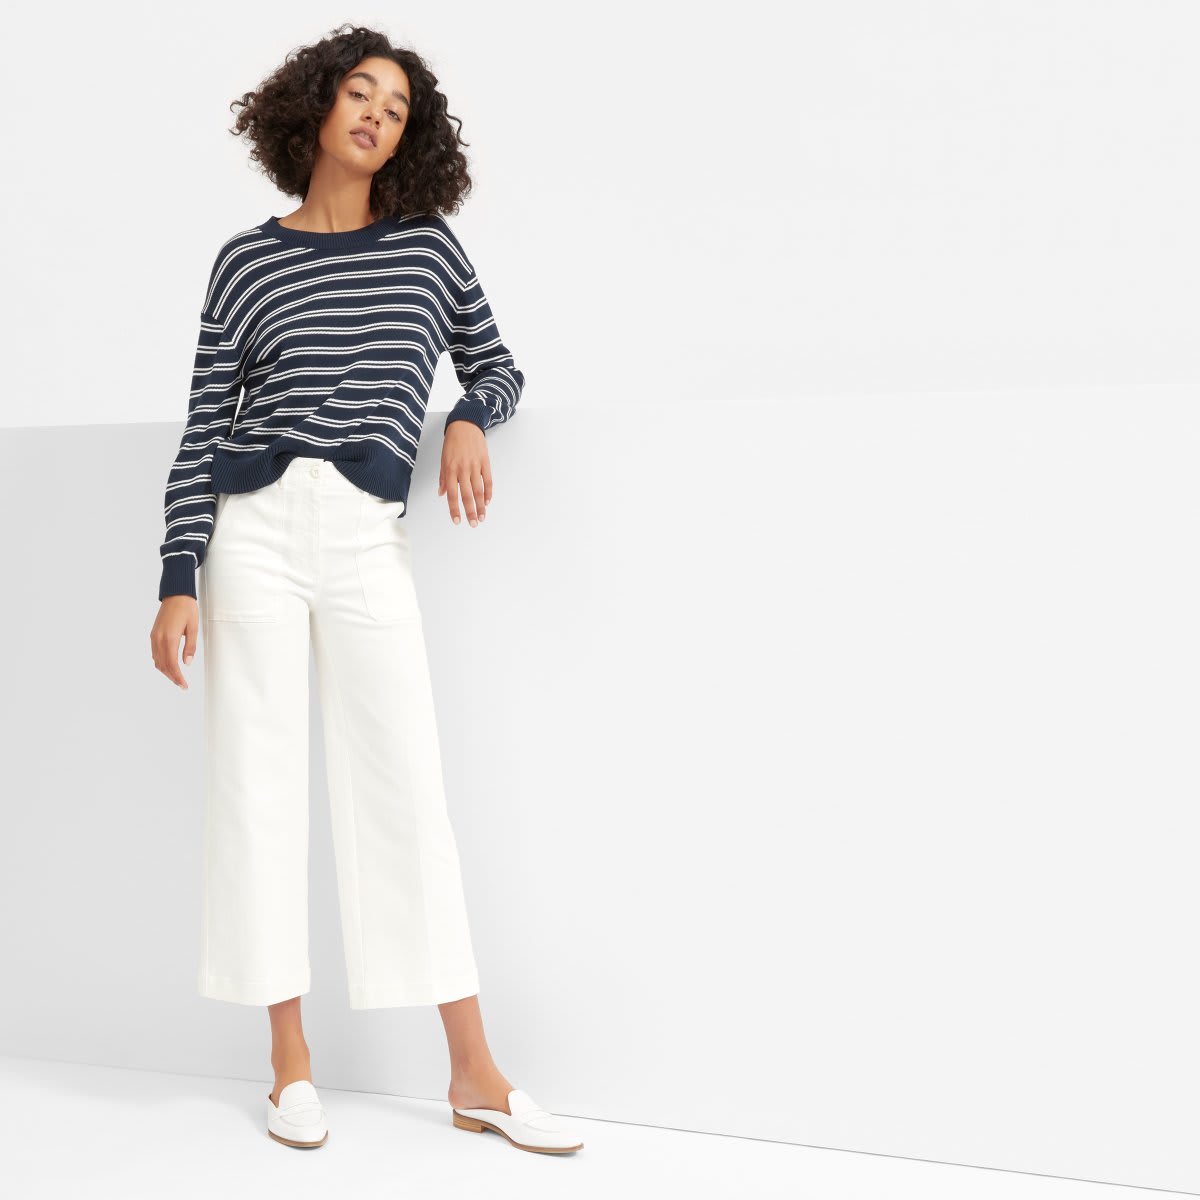 10 of the best white pants for women 2019